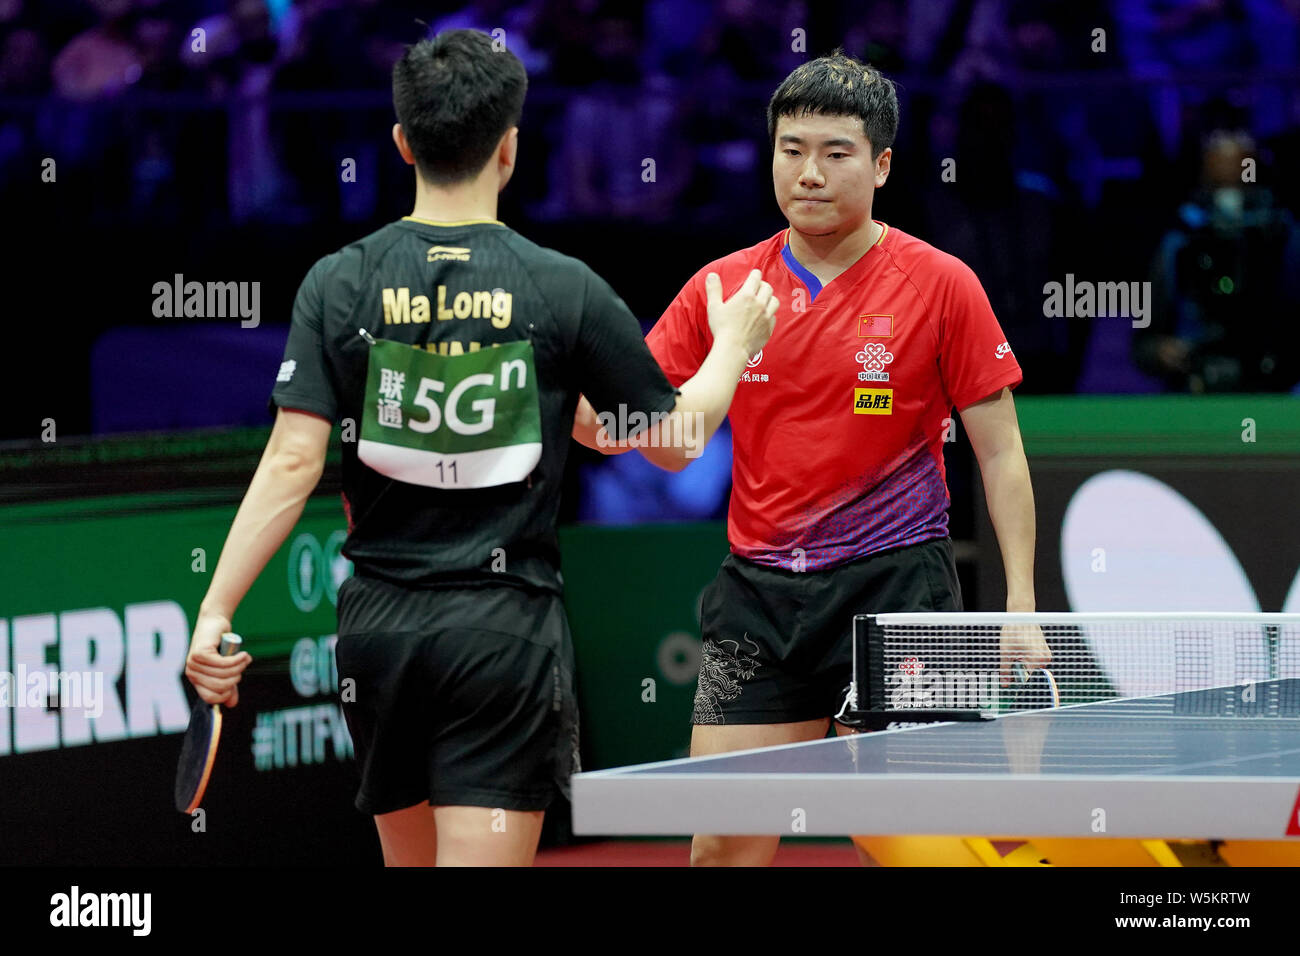 Ma Long of China shakes hands with Liang Jingkun of China after their semifinal match of Men's Singles during the Liebherr 2019 ITTF World Table Tenni Stock Photo